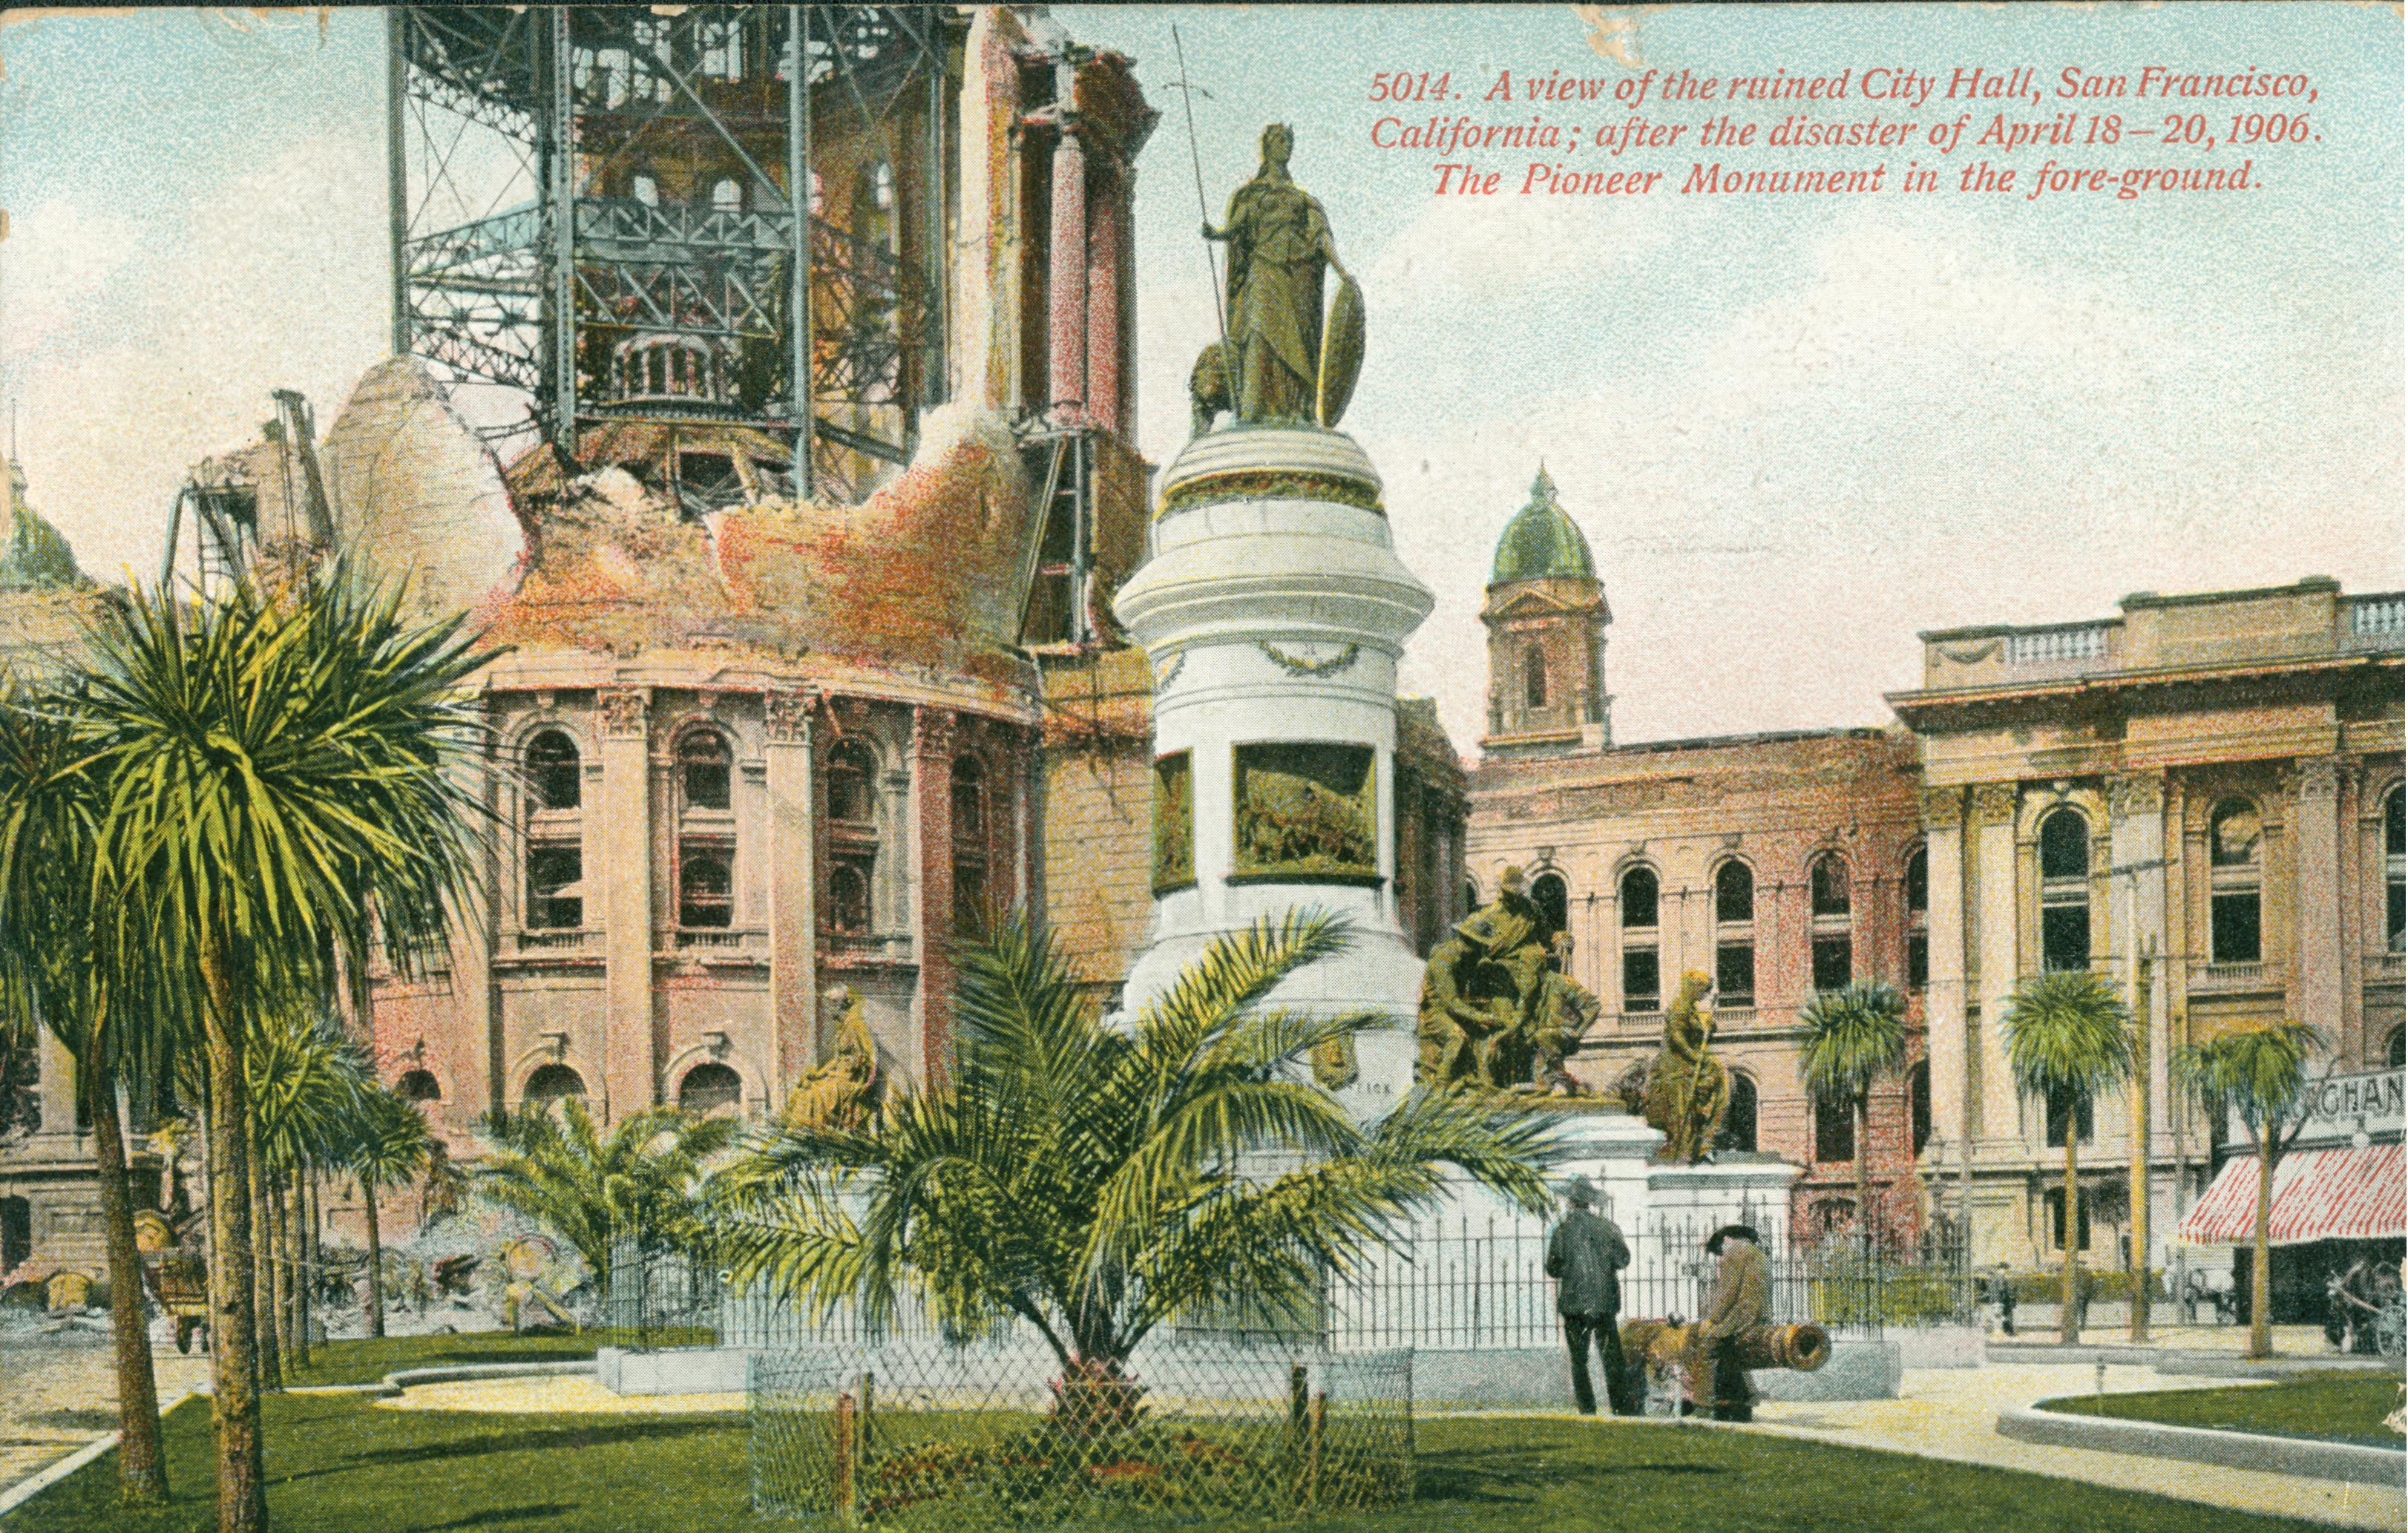 Drawing of the ruins of City Hall.